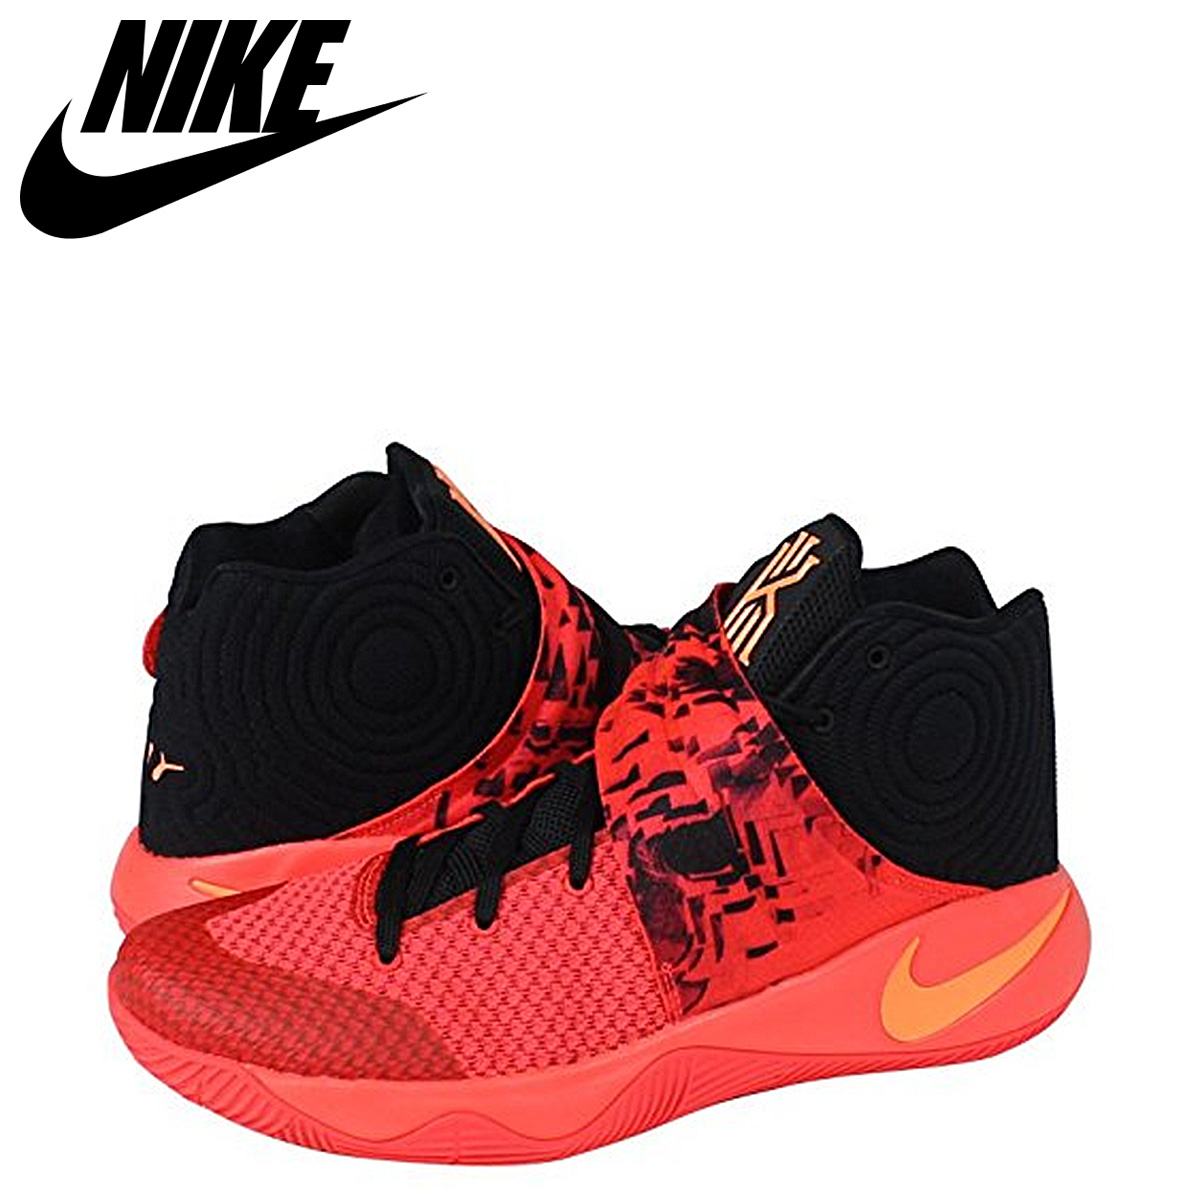 kyrie irving 2 inferno cheap online